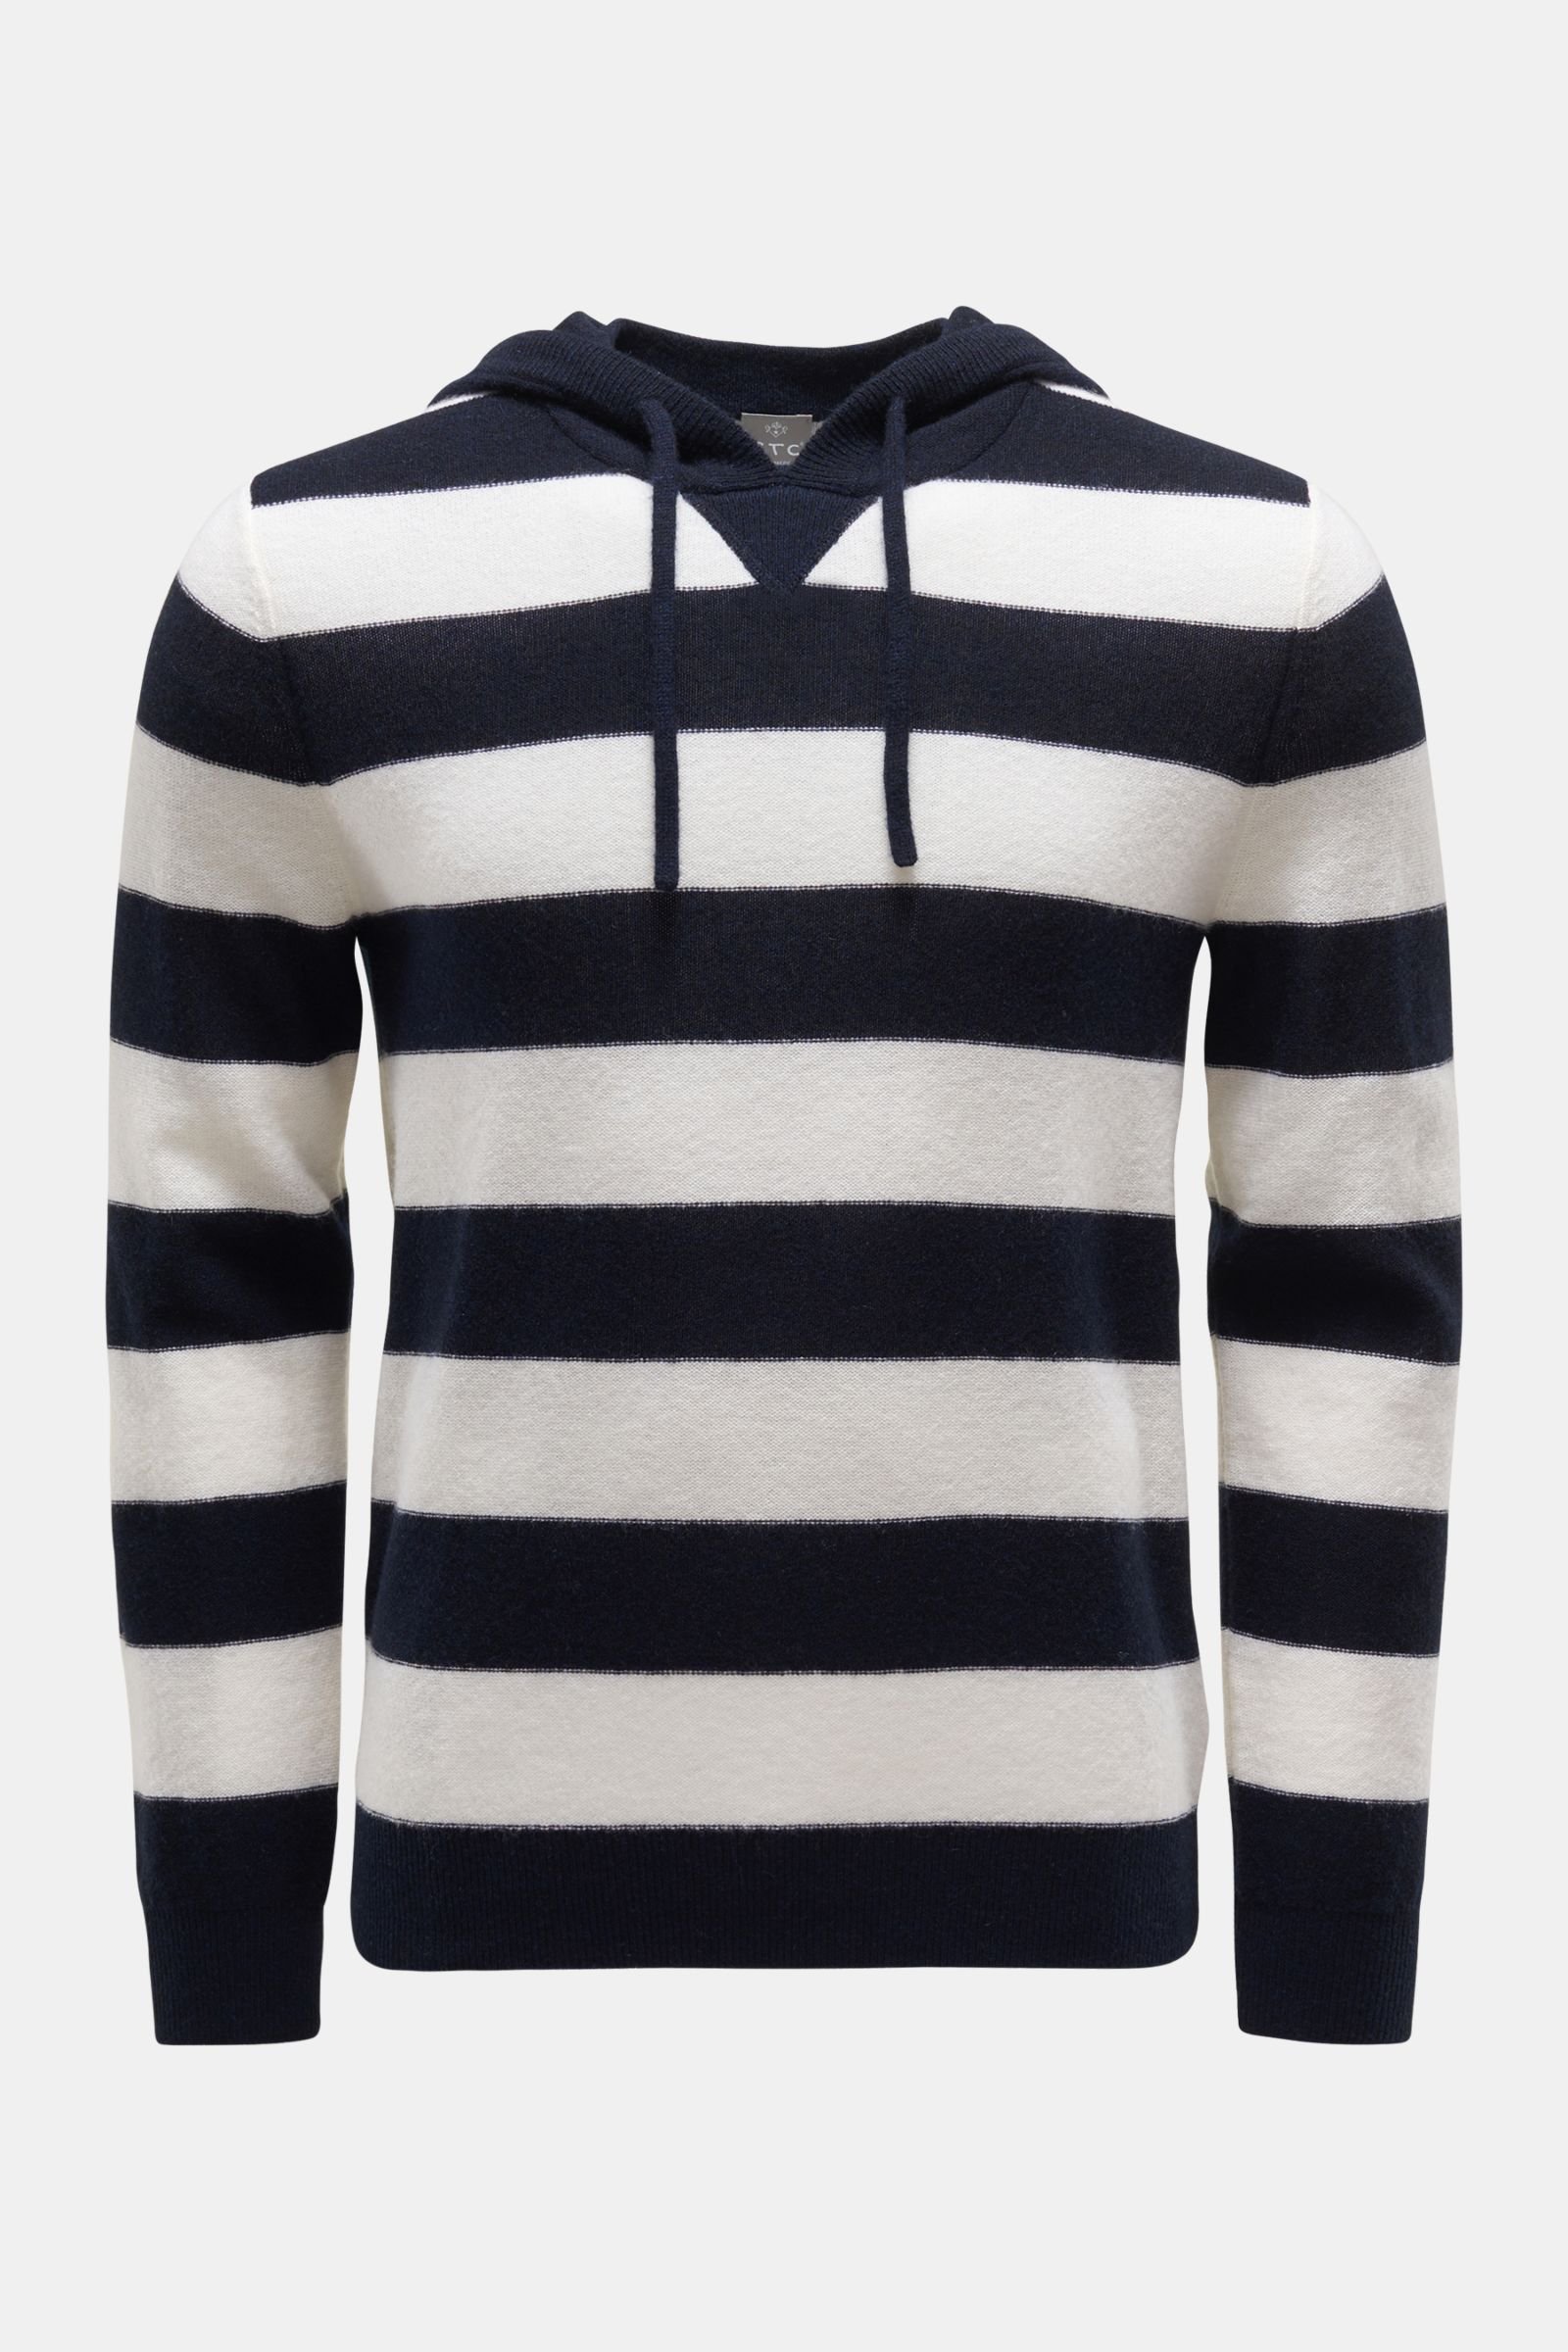 Cashmere hooded jumper navy/white striped